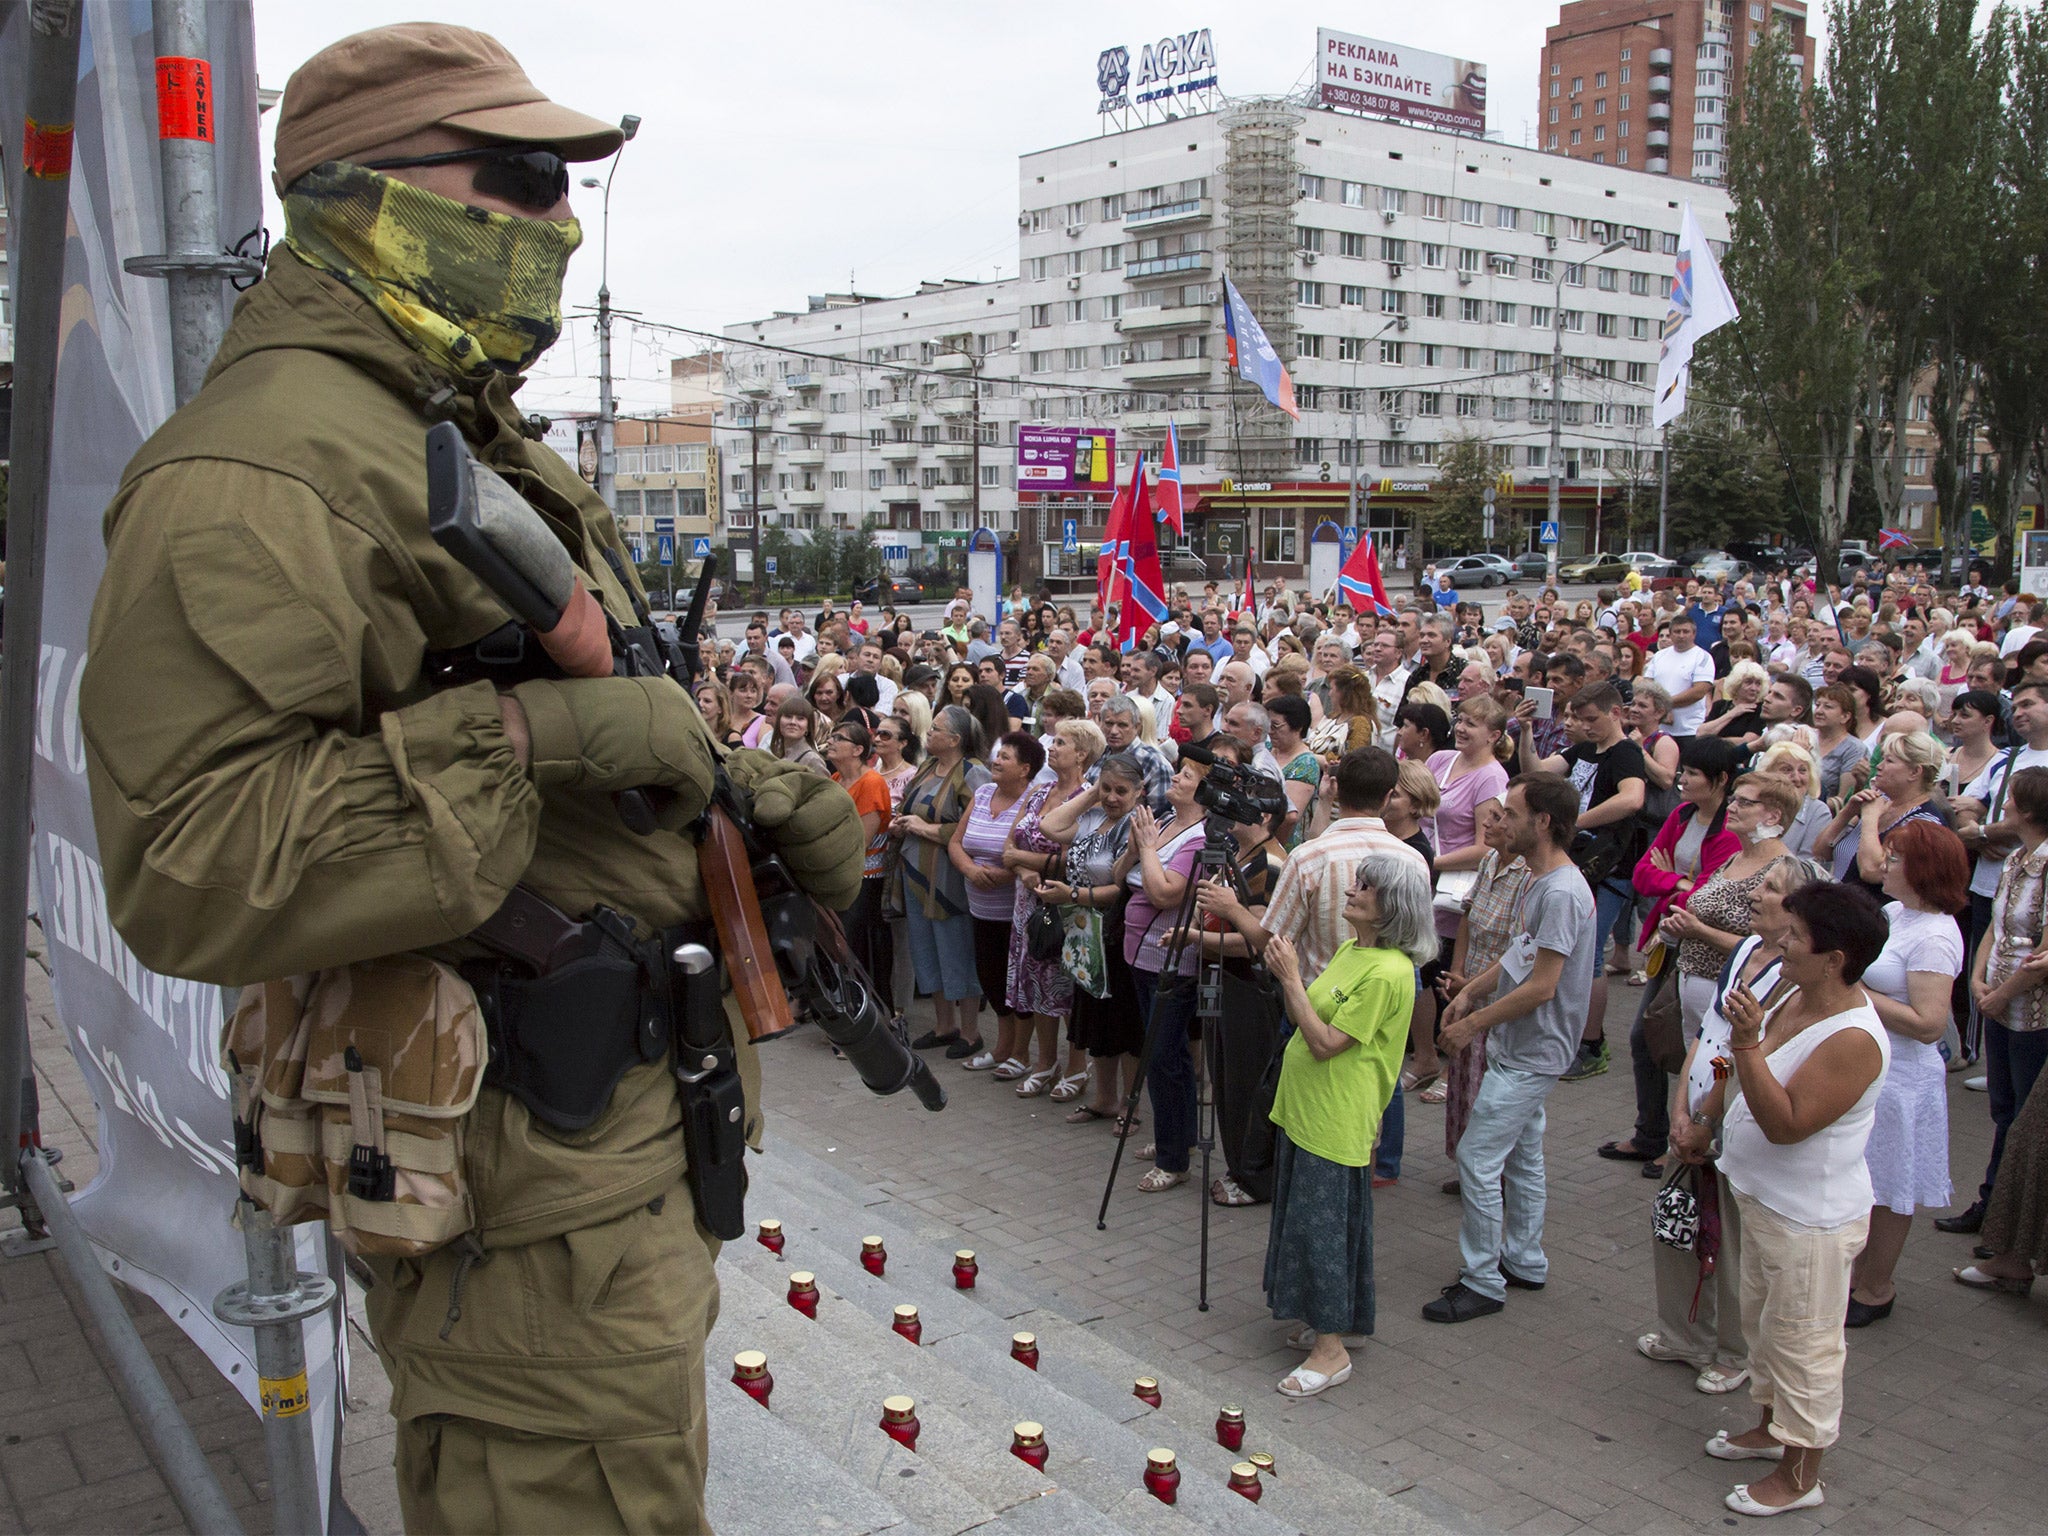 A Donetsk People's Republic fighter stands guard during a pro-Russian meeting in the city of Donetsk earlier this month